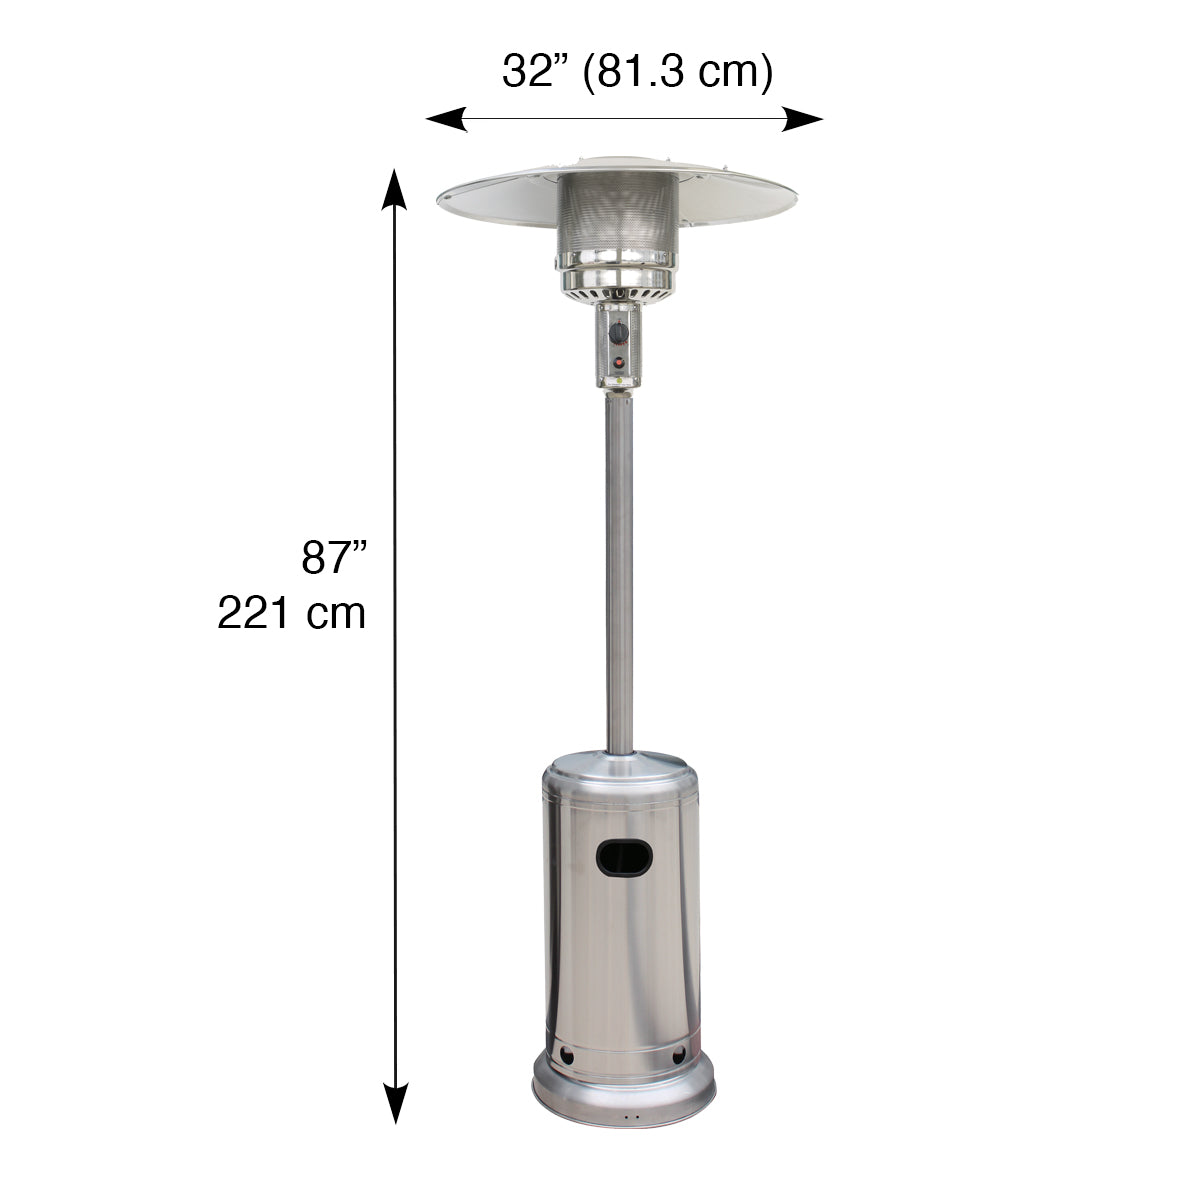 Blue Sky Outdoor Stainless Steel Gas Patio Heater 48,000 BTU - Senior.com Heaters & Fireplaces